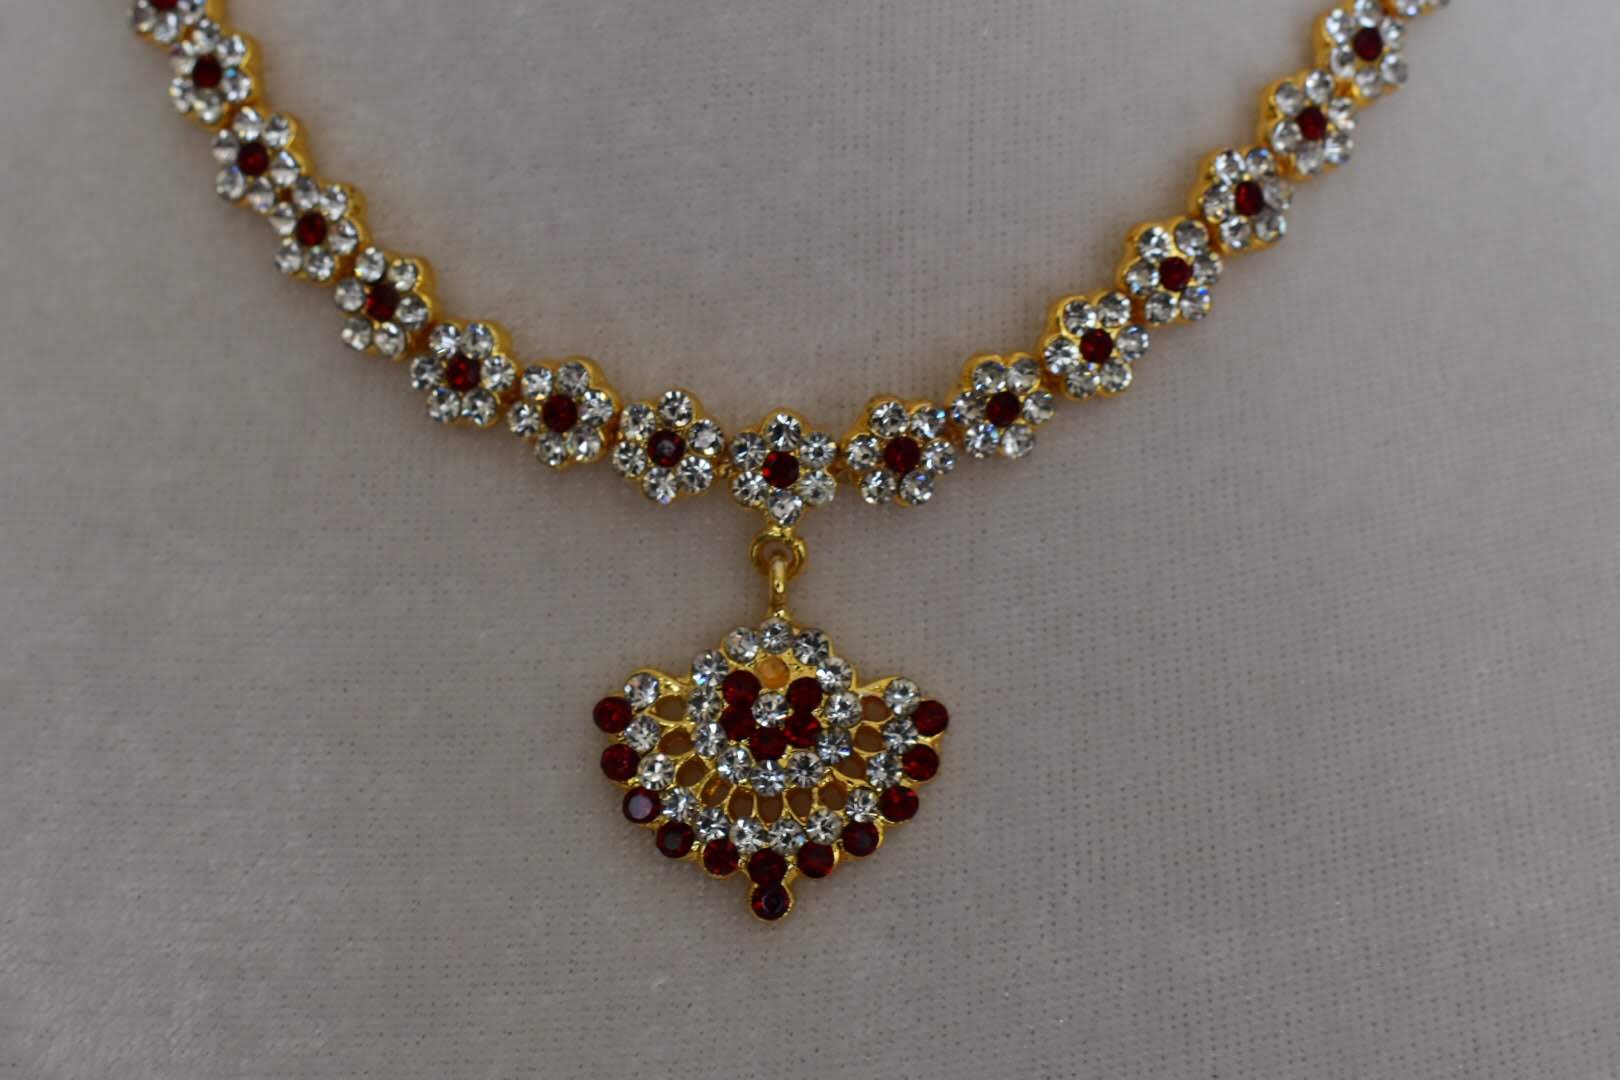 Gold Plated - Temple Jewelry - Short Necklace with Jewel stones